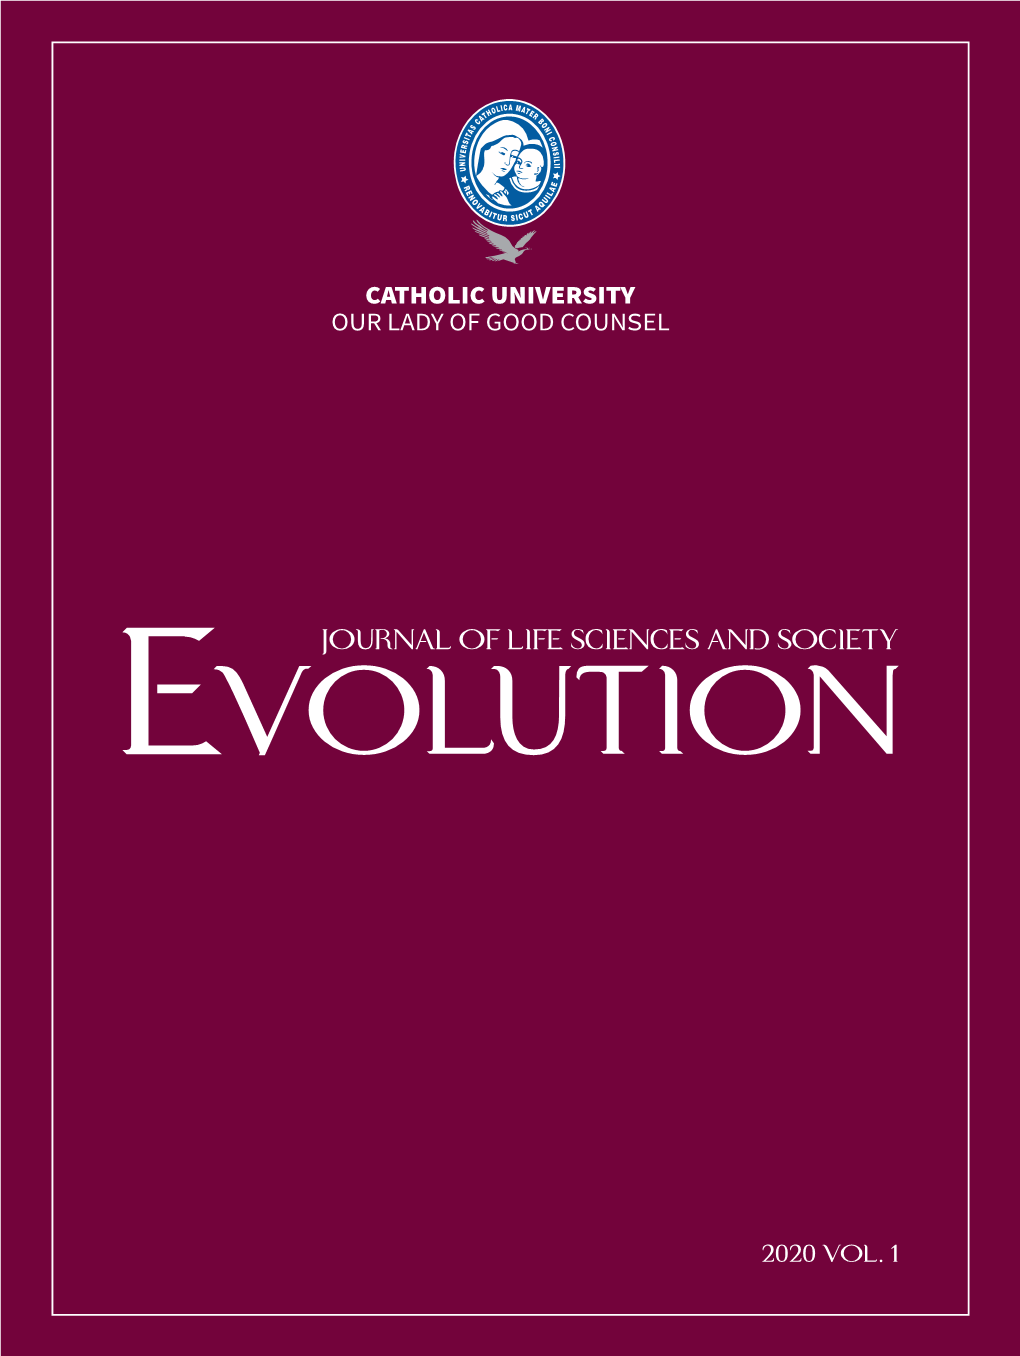 Evolution Journal of Life Sciences and Society